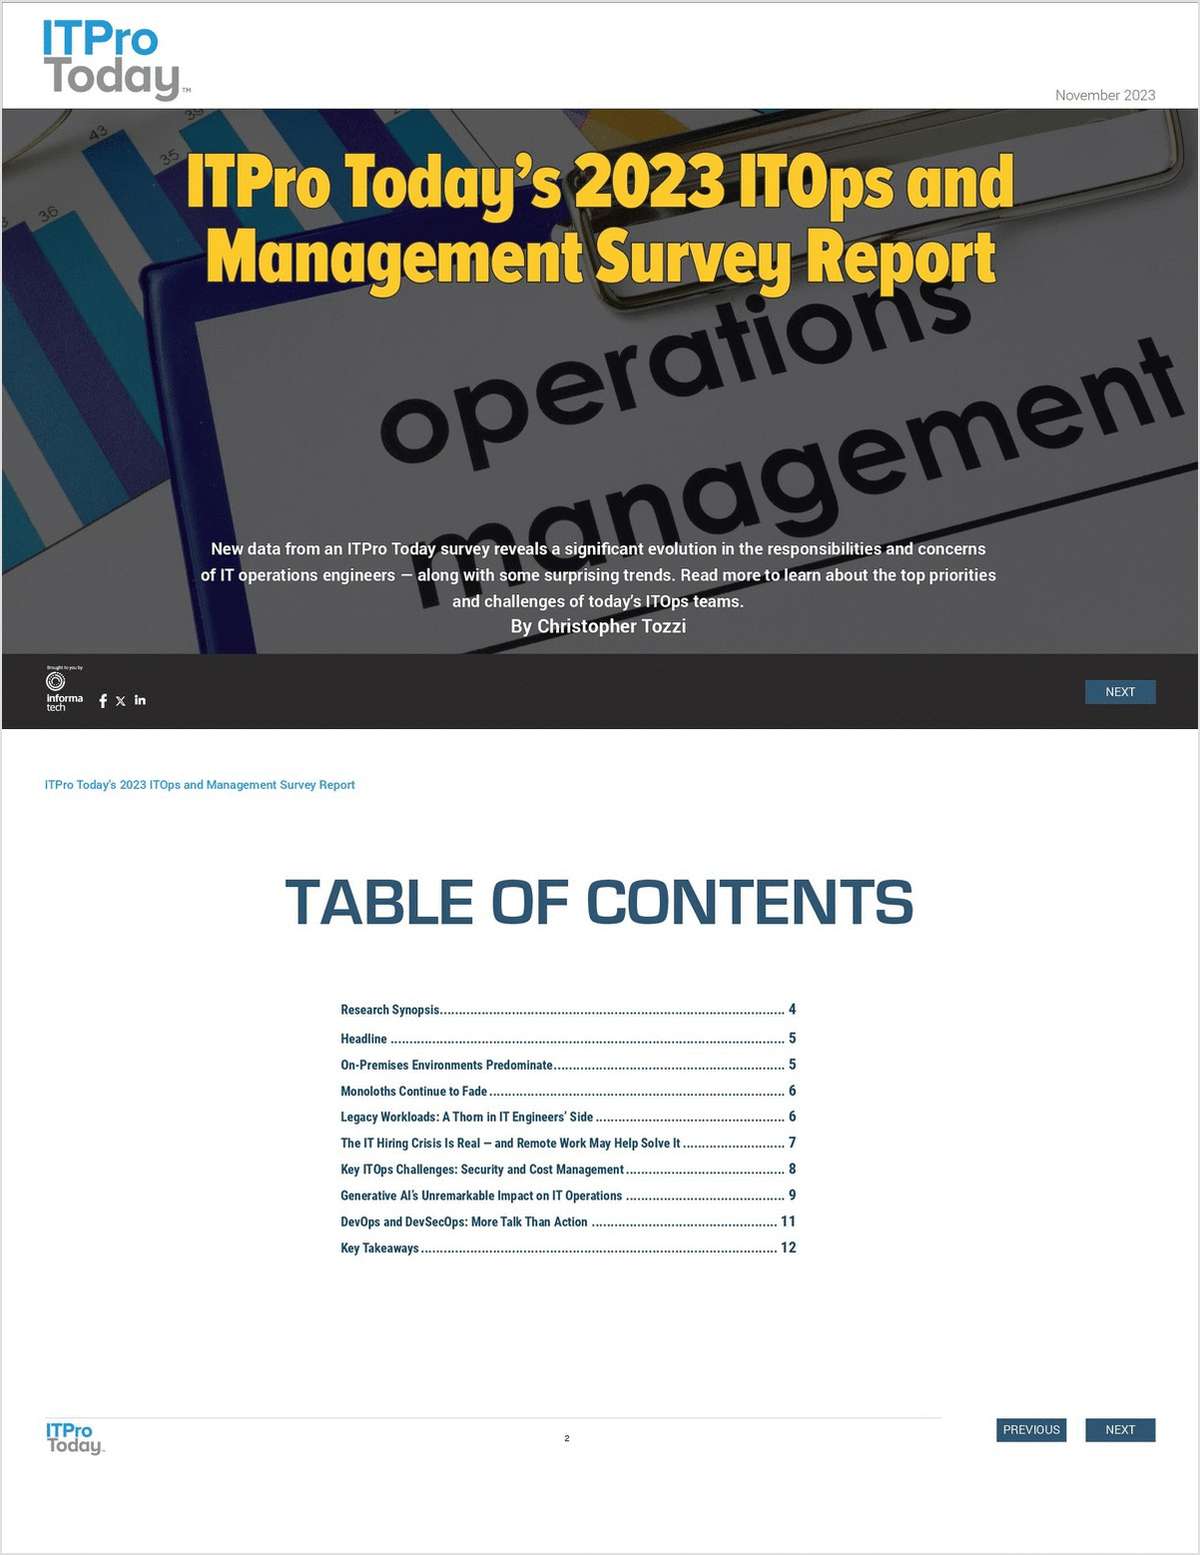 2023 ITOps and Management Survey Report